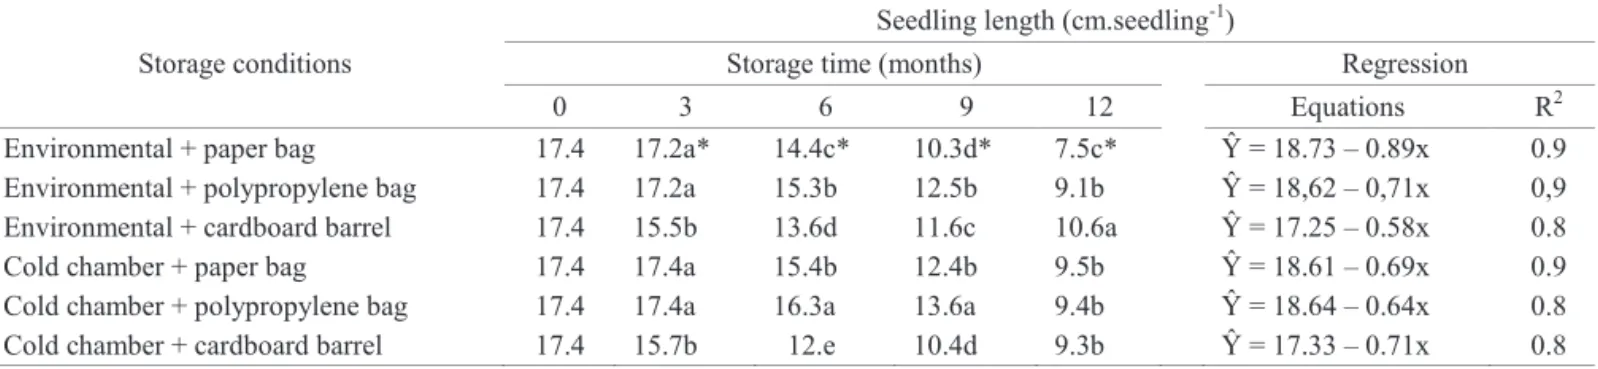 Table 5. Seedling length from physic nut seeds stored during 12 months under two different environmental conditions and three  different type of packaging.